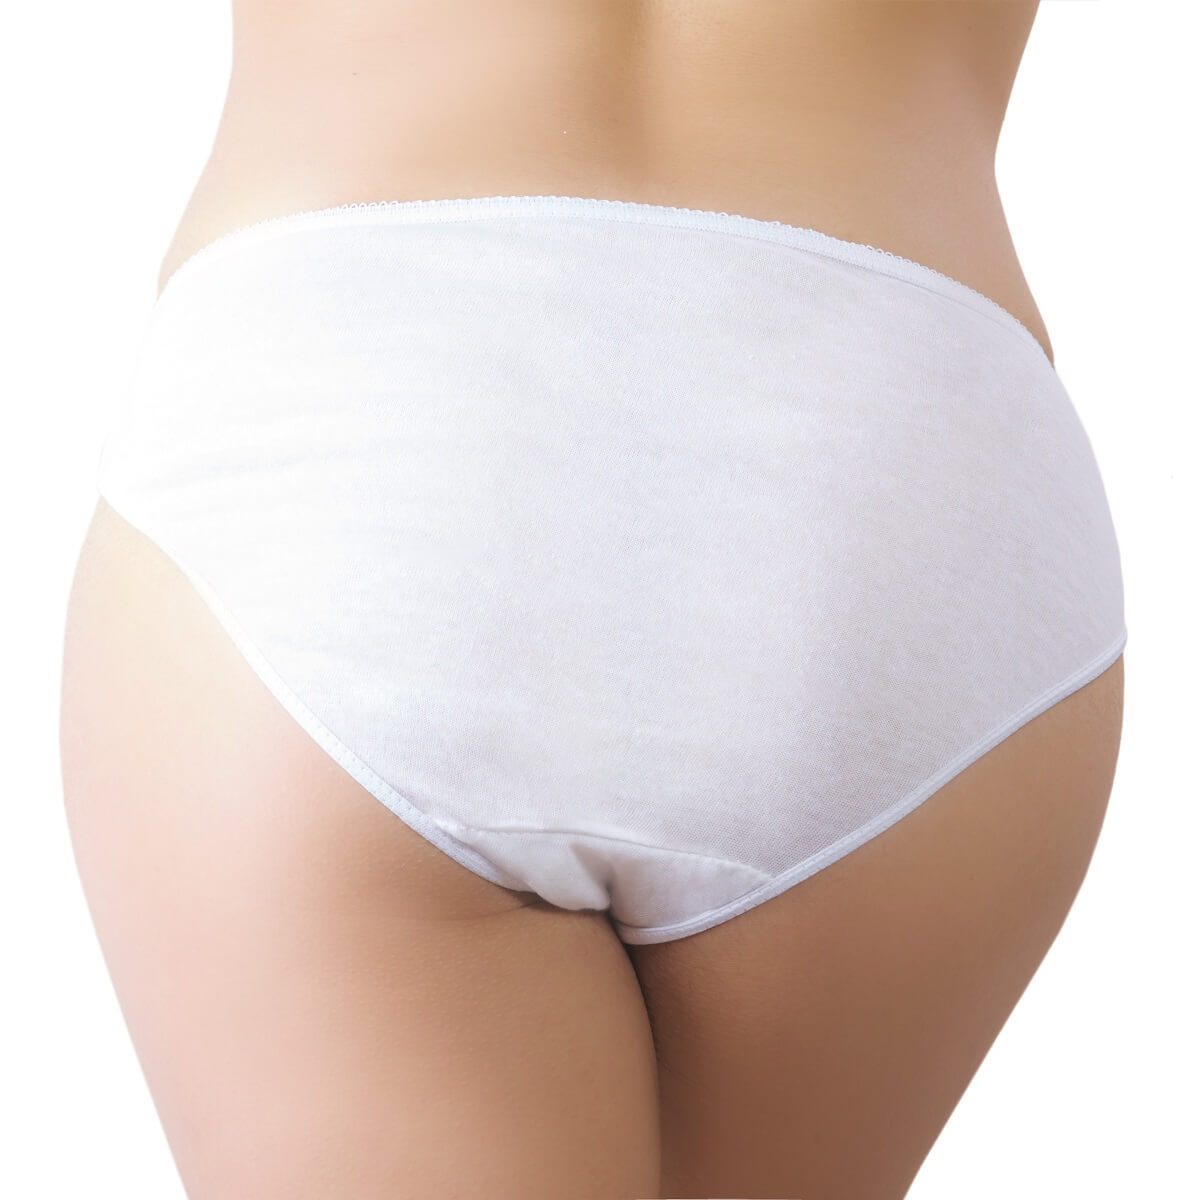 Maternity Bottoms BC Babycare Disposable 100% Cotton Pregnant Panties  Underwear Travel Breathable Soft Postpartum Underpants Briefs 230512 From  Xianstore06, $13.61